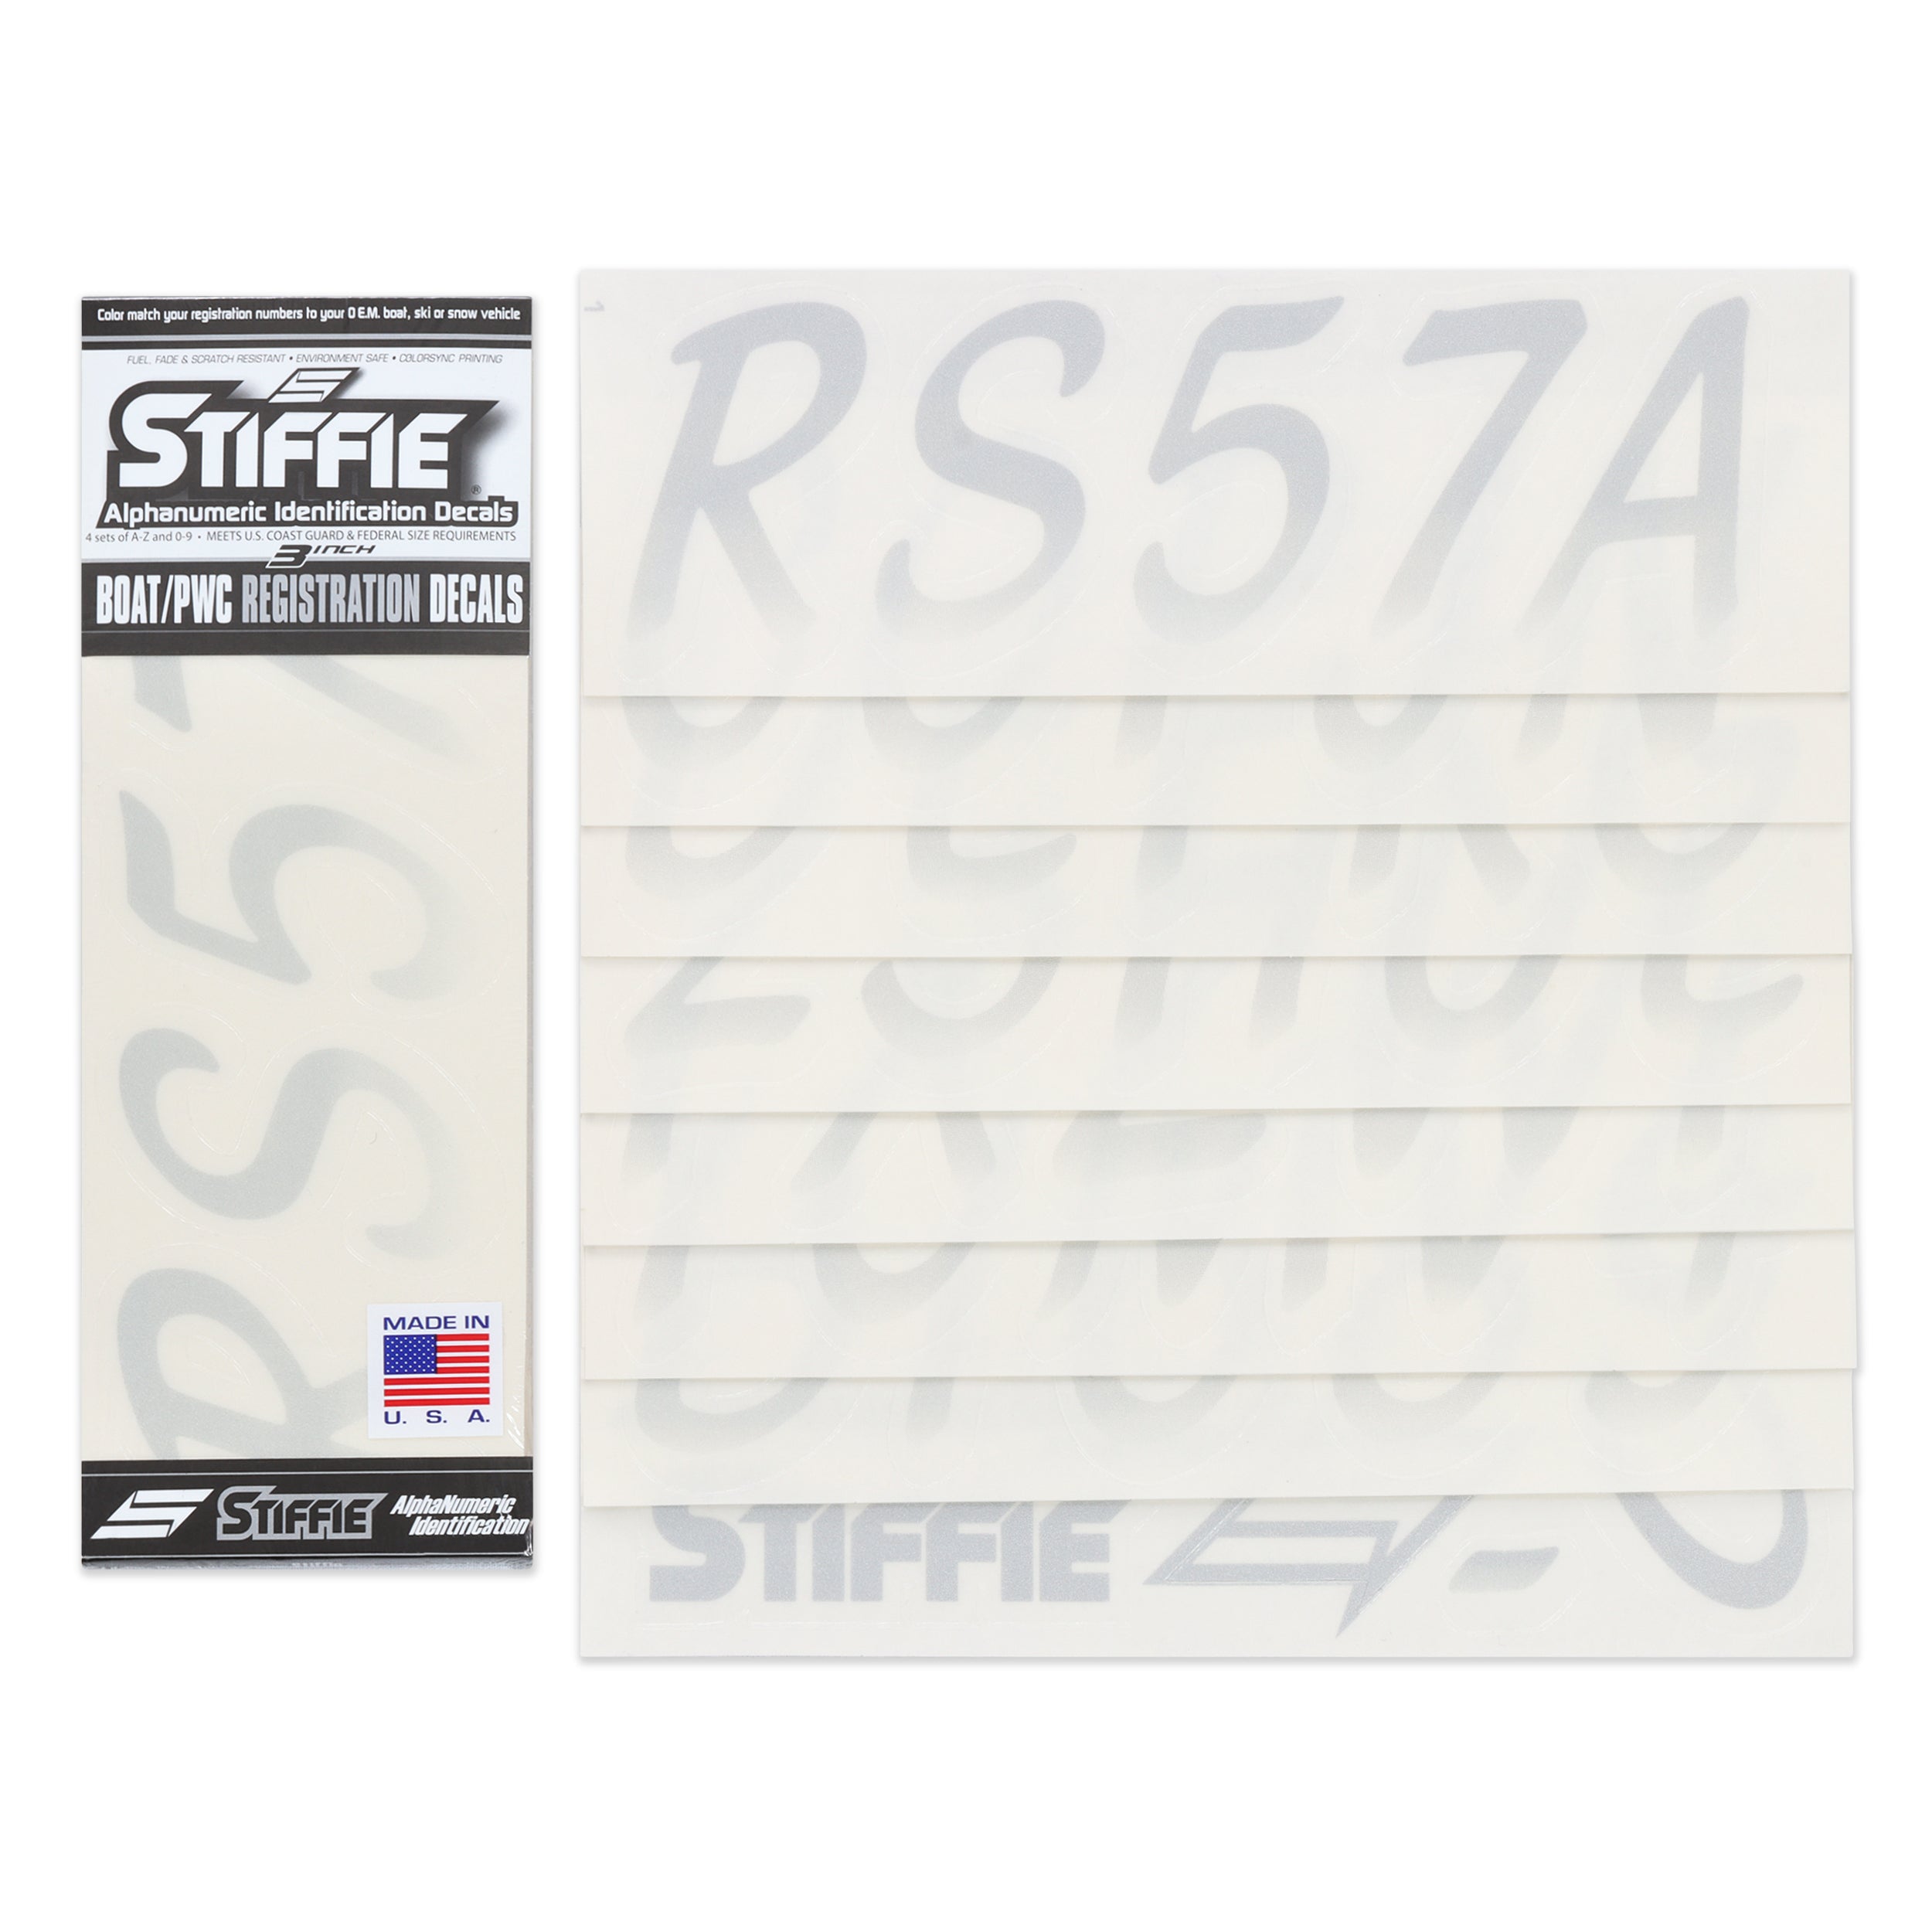 Stiffie Whipline Met. Silver/Transparent Clear 3" Alpha-Numeric Registration Identification Numbers Stickers Decals for Boats & Personal Watercraft